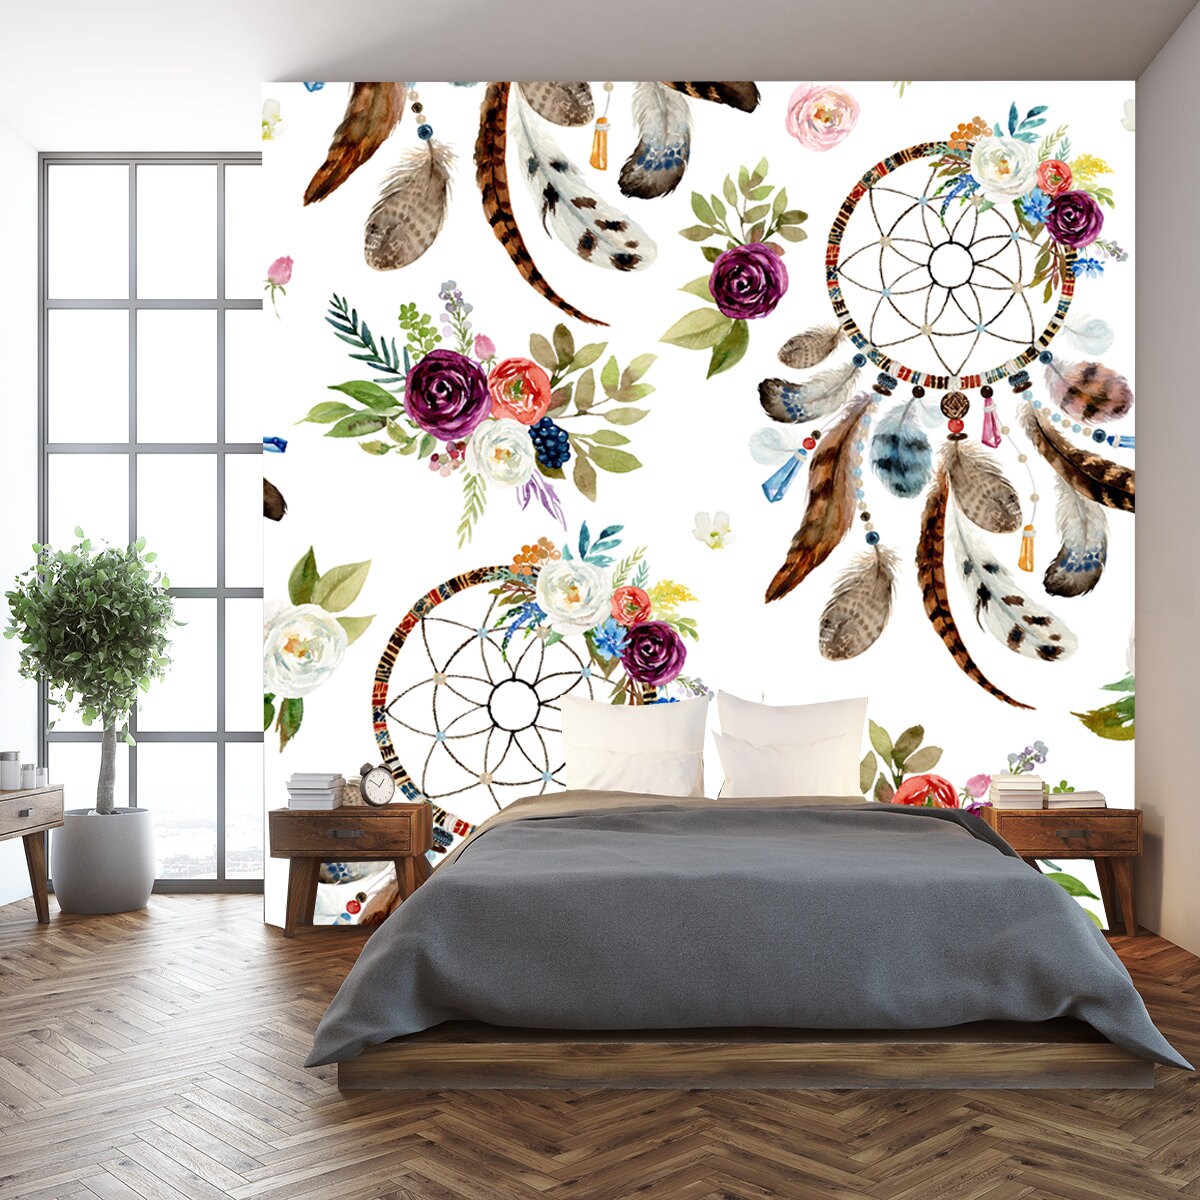 Watercolor Ethnic Boho Floral Pattern. Dreamcatchers and Flowers on White Background Wallpaper Bedroom Mural